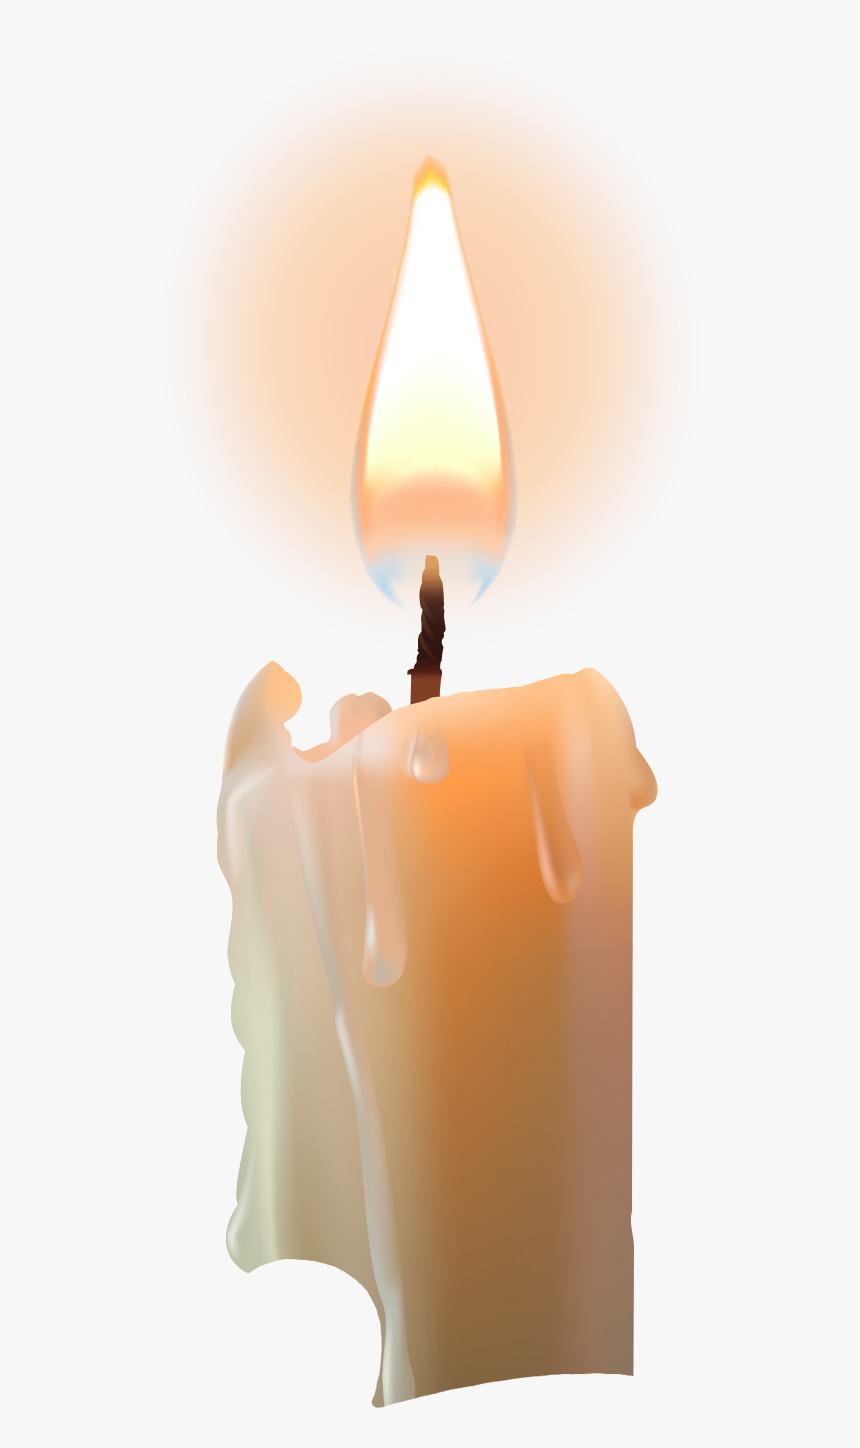 Candle Computer File - Candle Light Png, Transparent Png, Free Download